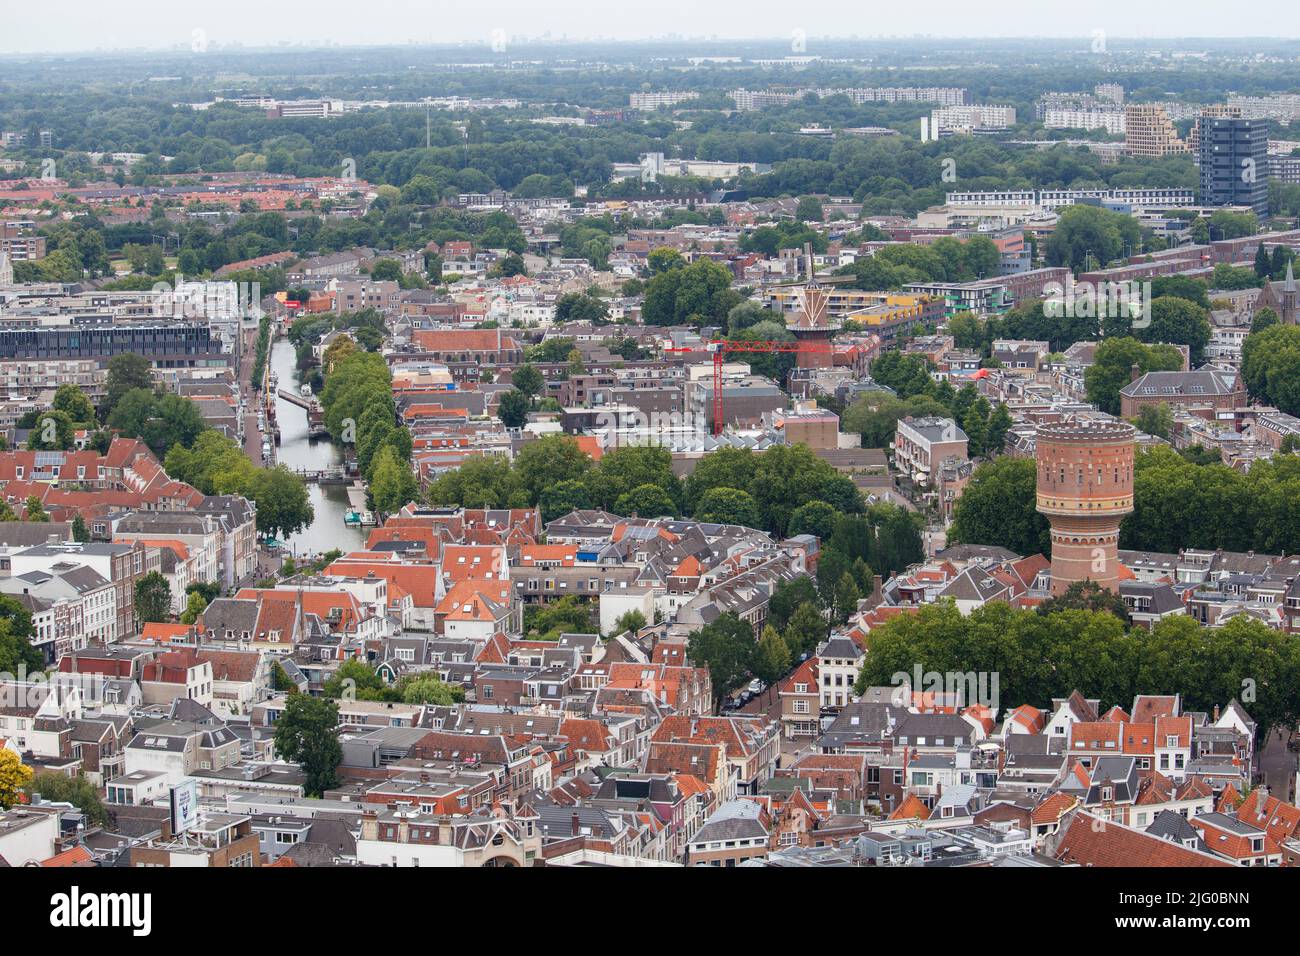 Views of Utrecht taken from the very top of the Dom Tower. Stock Photo